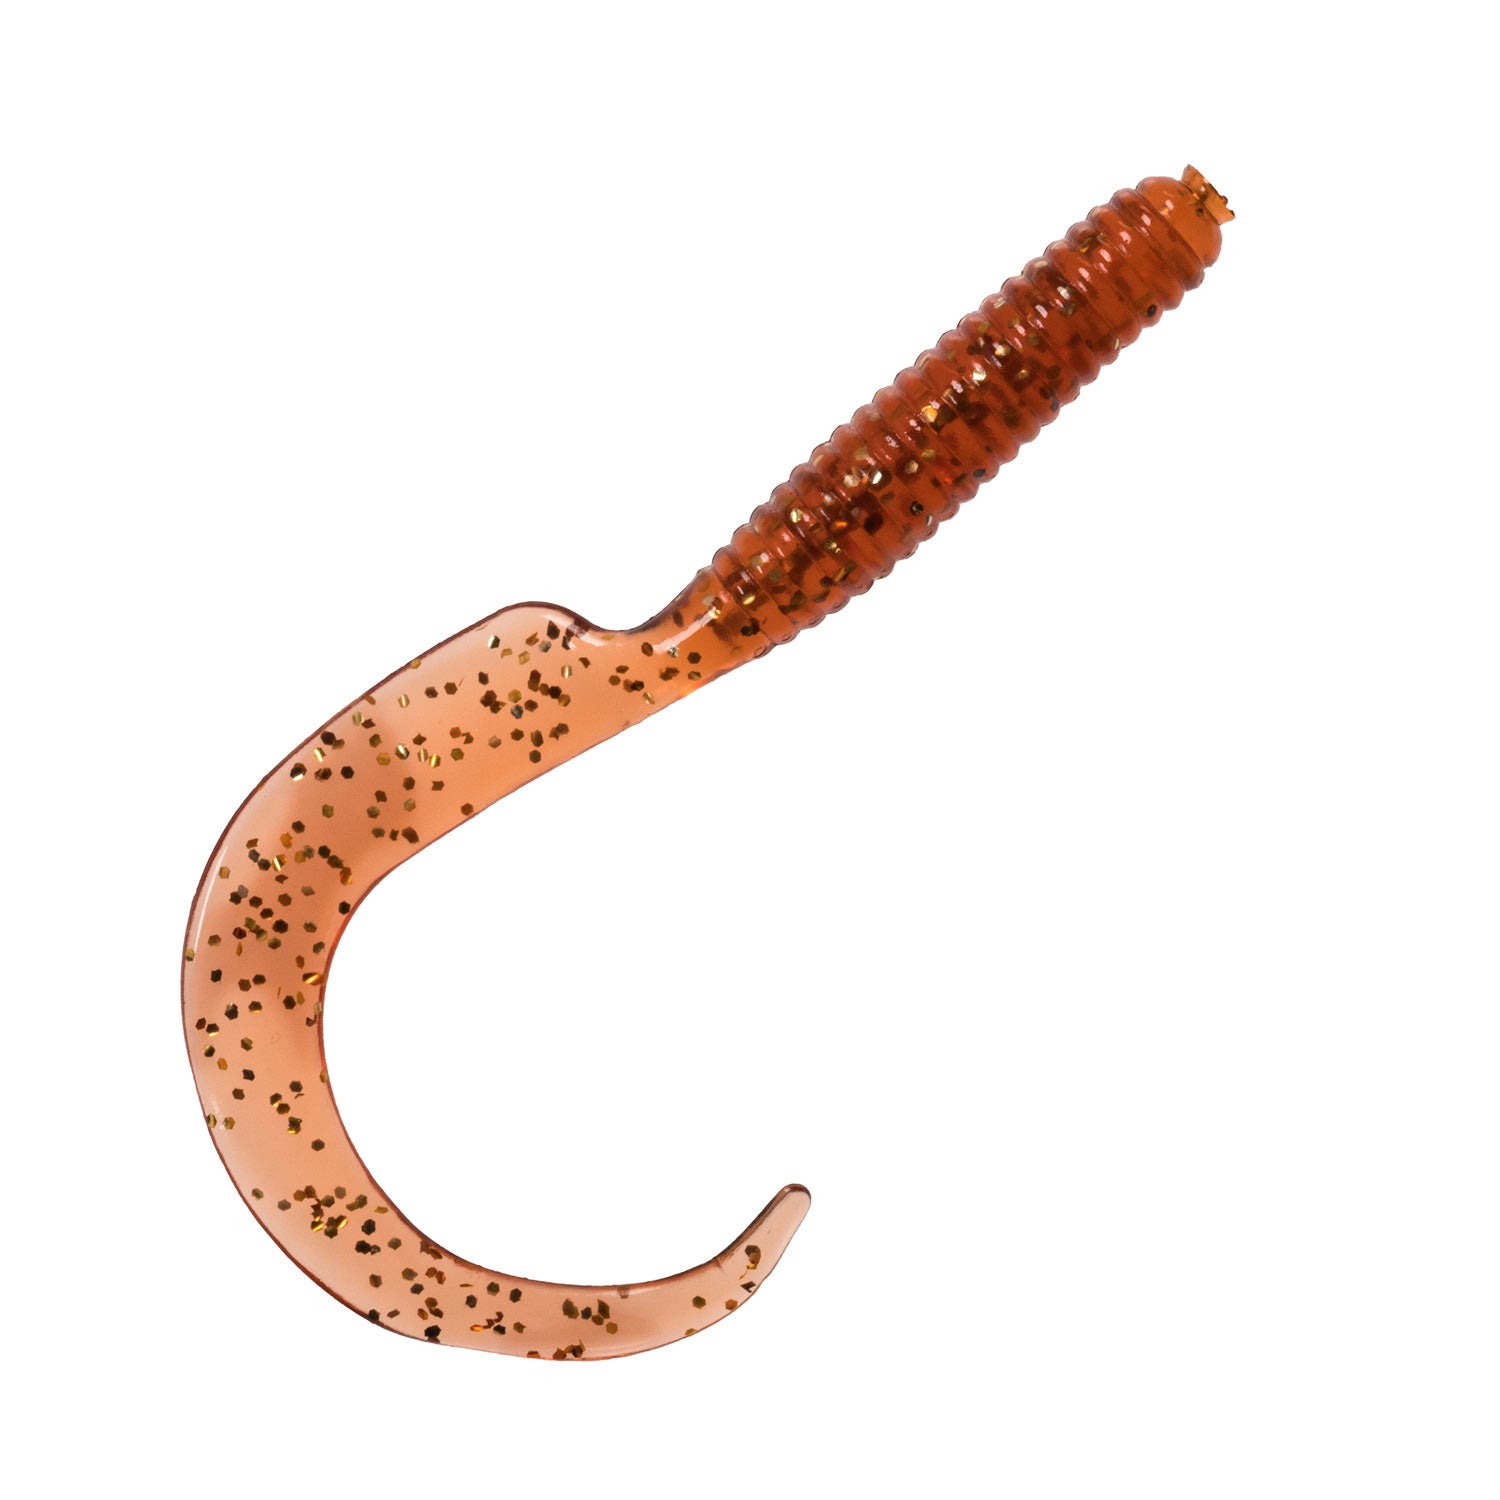 Charlies Worms 6" Grub Rootbeer Red